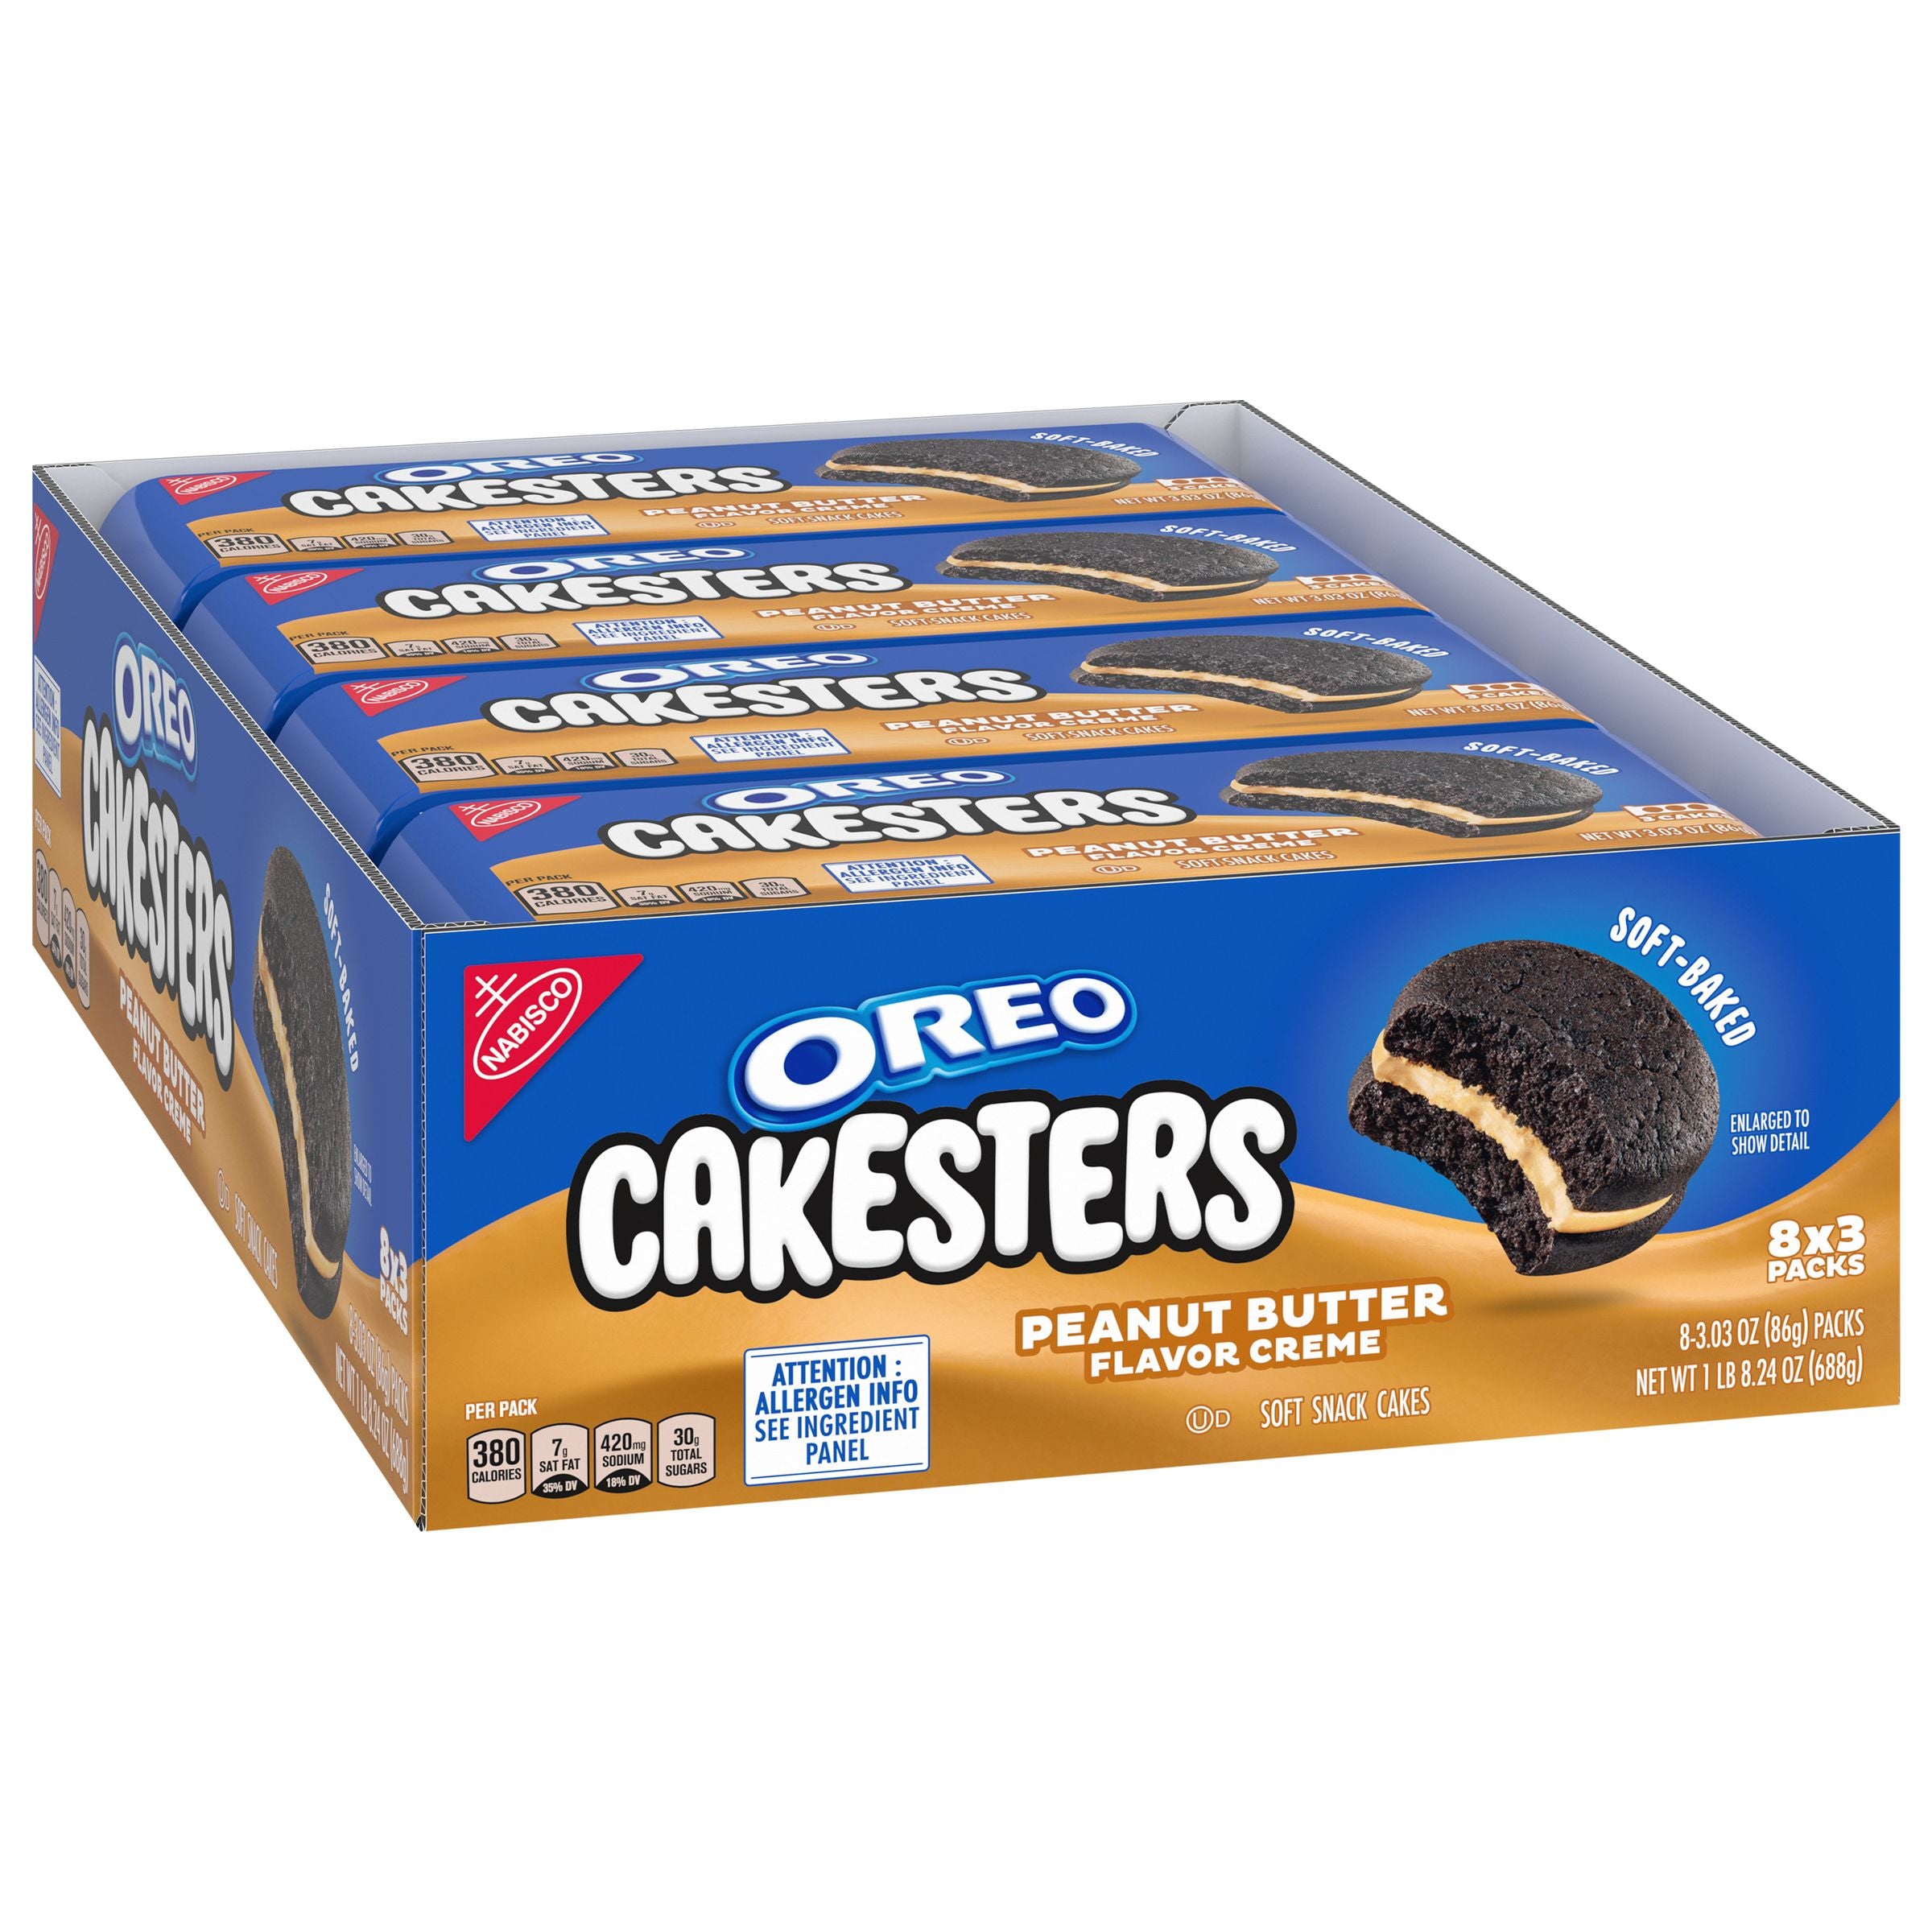 Oreo Cakesters Peanut Butter and Cream 86g (8 Pack)